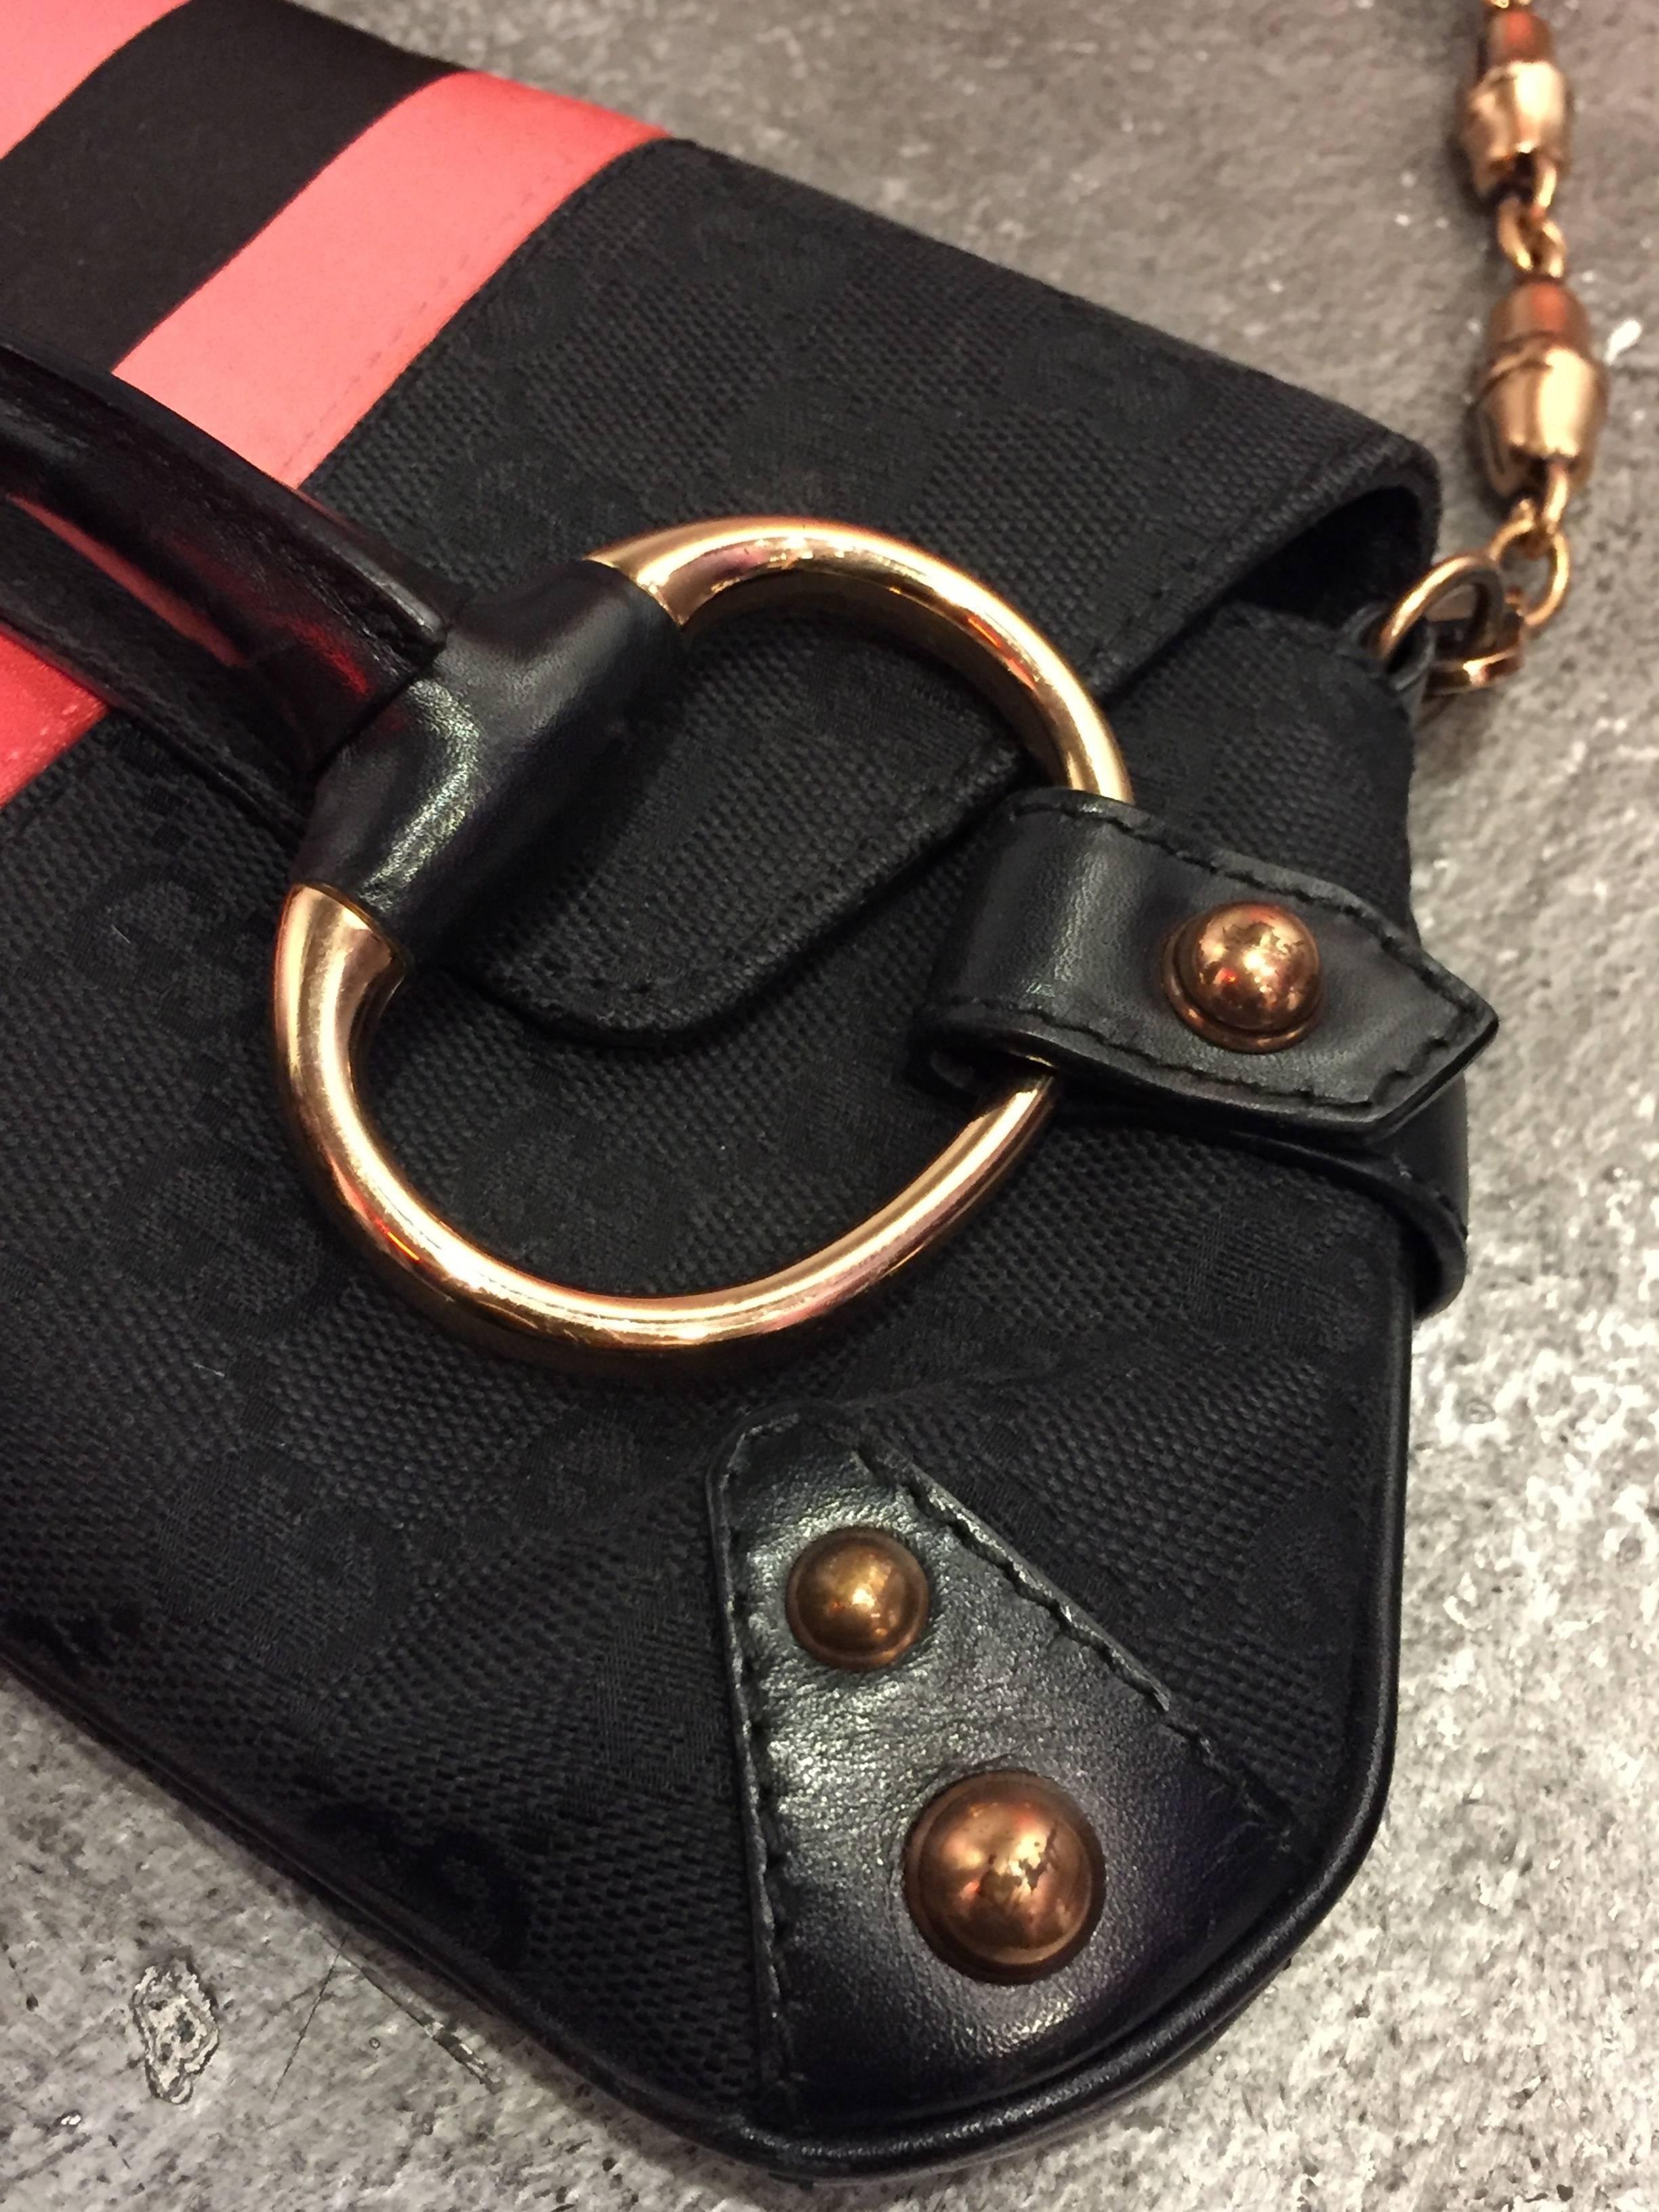 Tom Ford for Gucci, logo canvas purse with leather trim corners, D-ring snaffle bit trimmed in leather, and peau de soie racing stripe embellishment. Chain link handle is composed of links of rose gold metal molded as faux bamboo. 